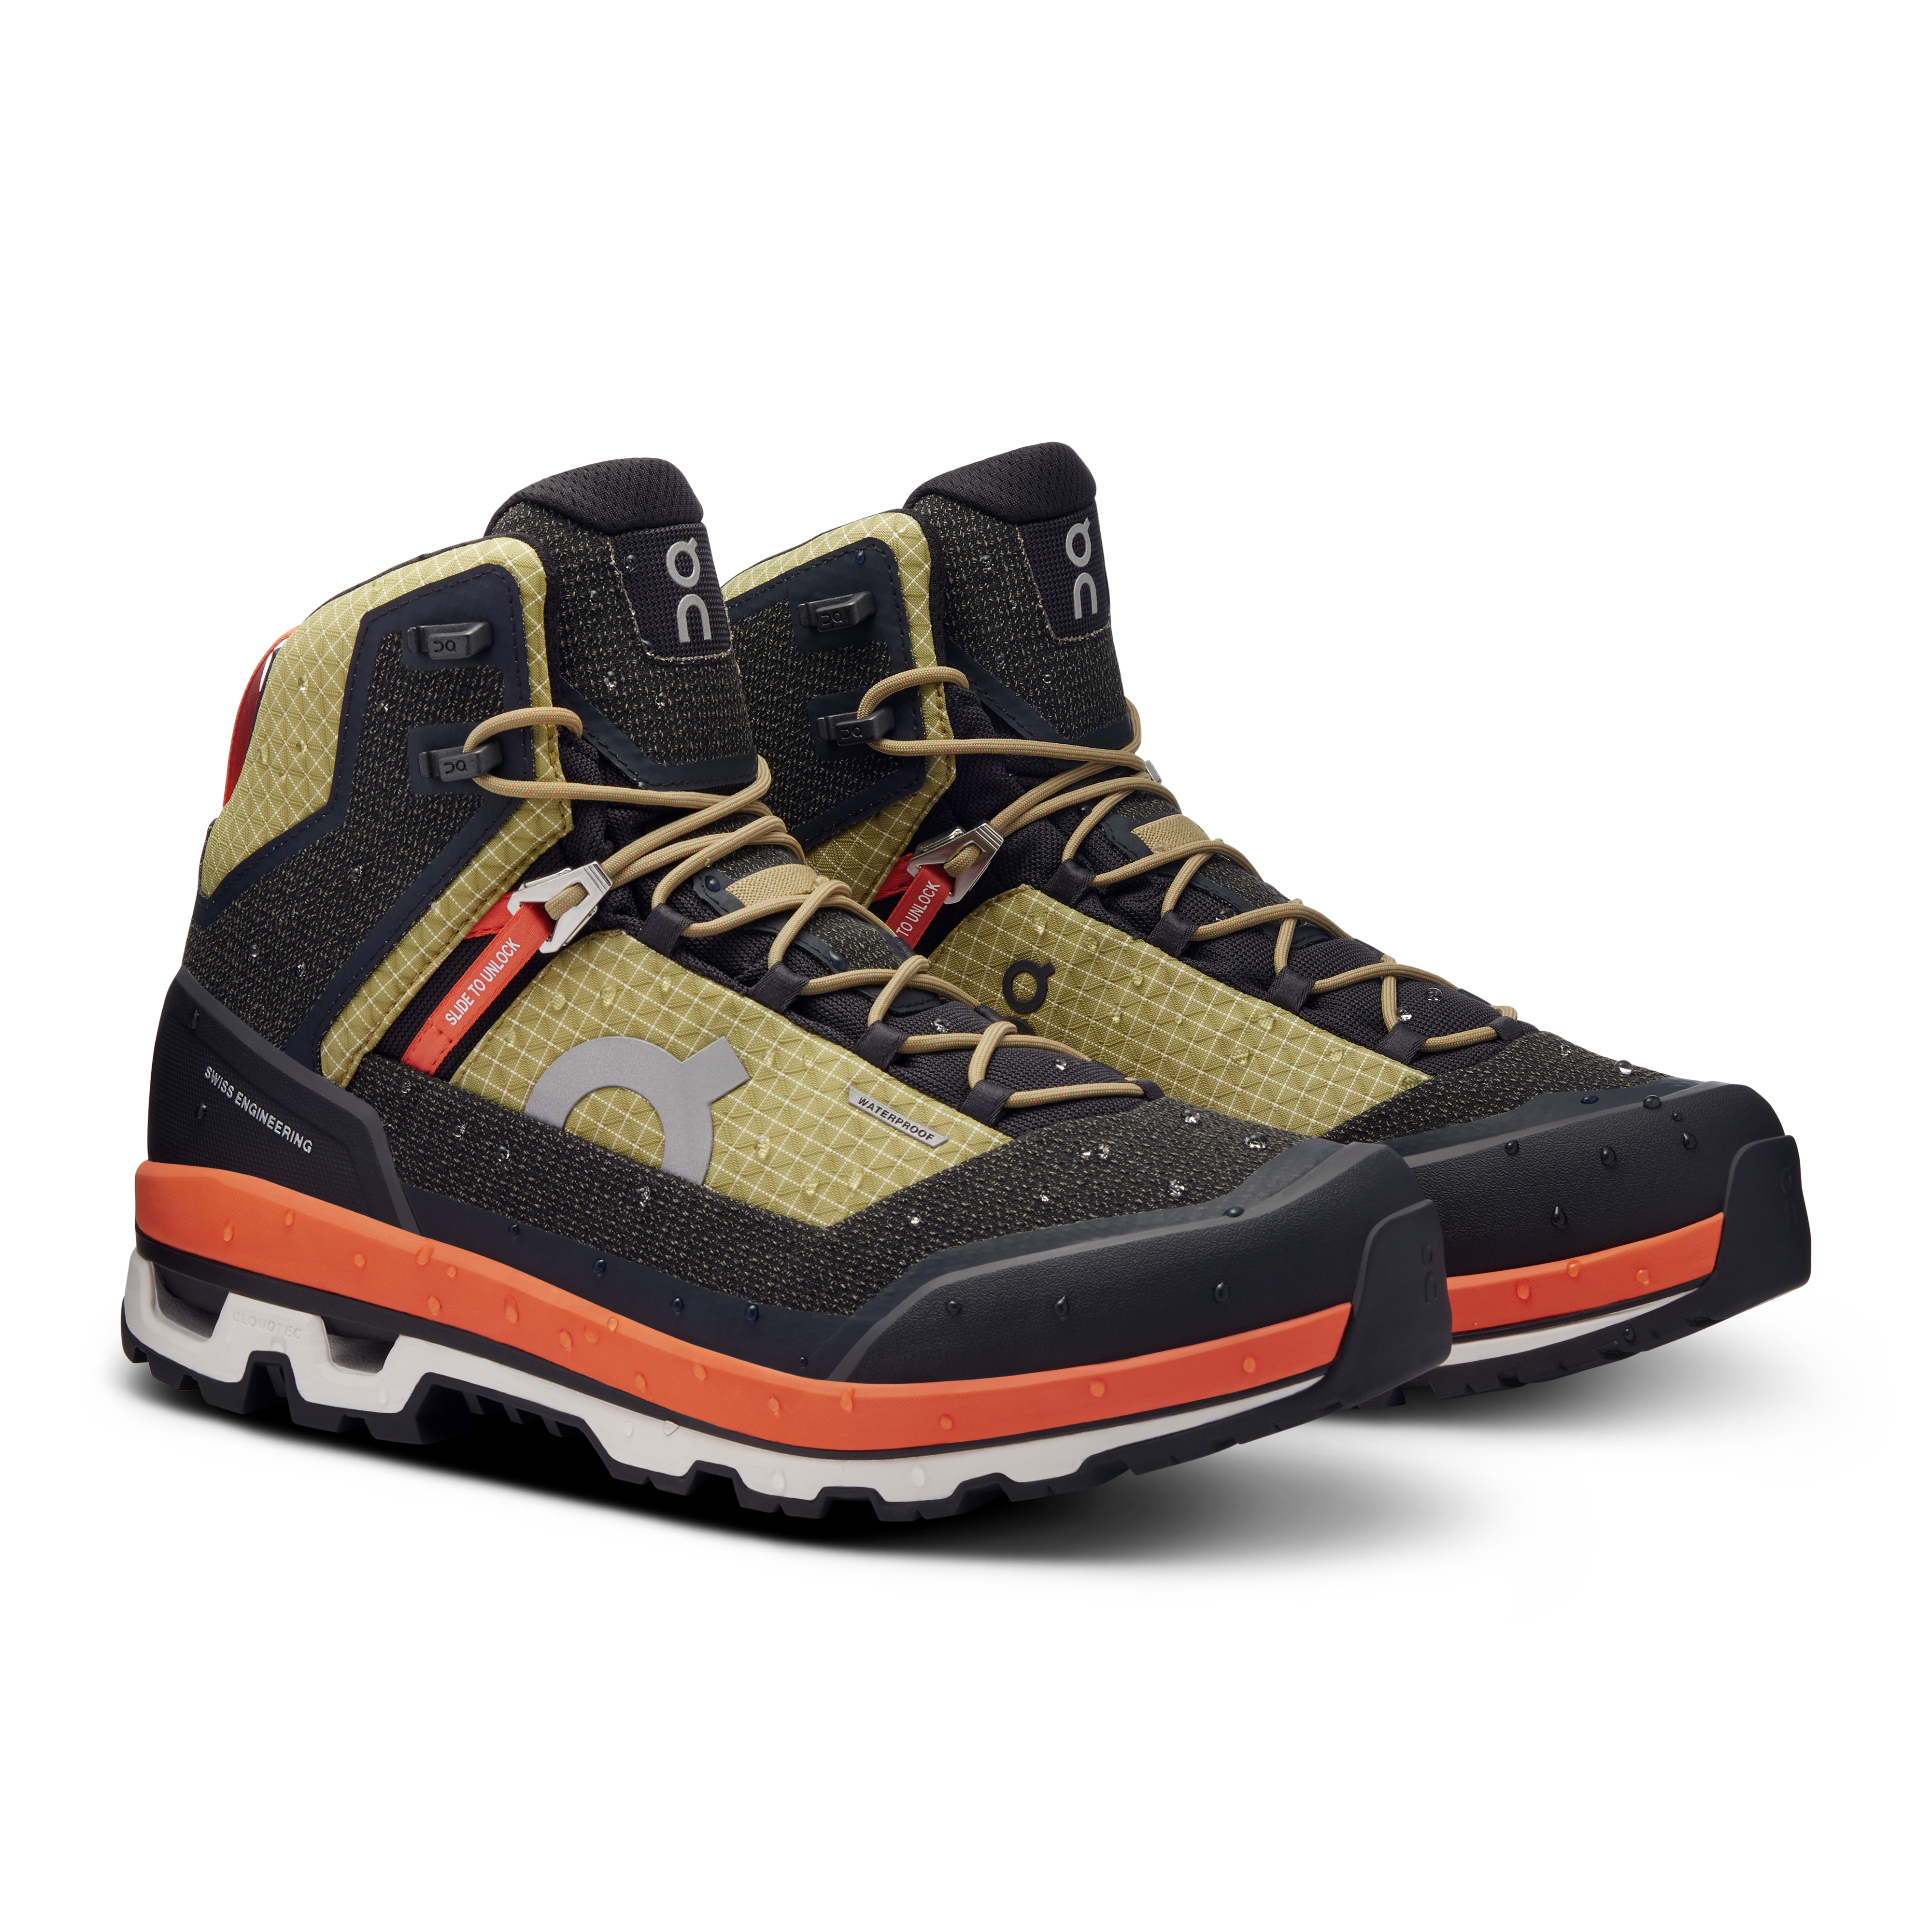 GORE-TEX Hiking Shoes & Boots for Men for sale